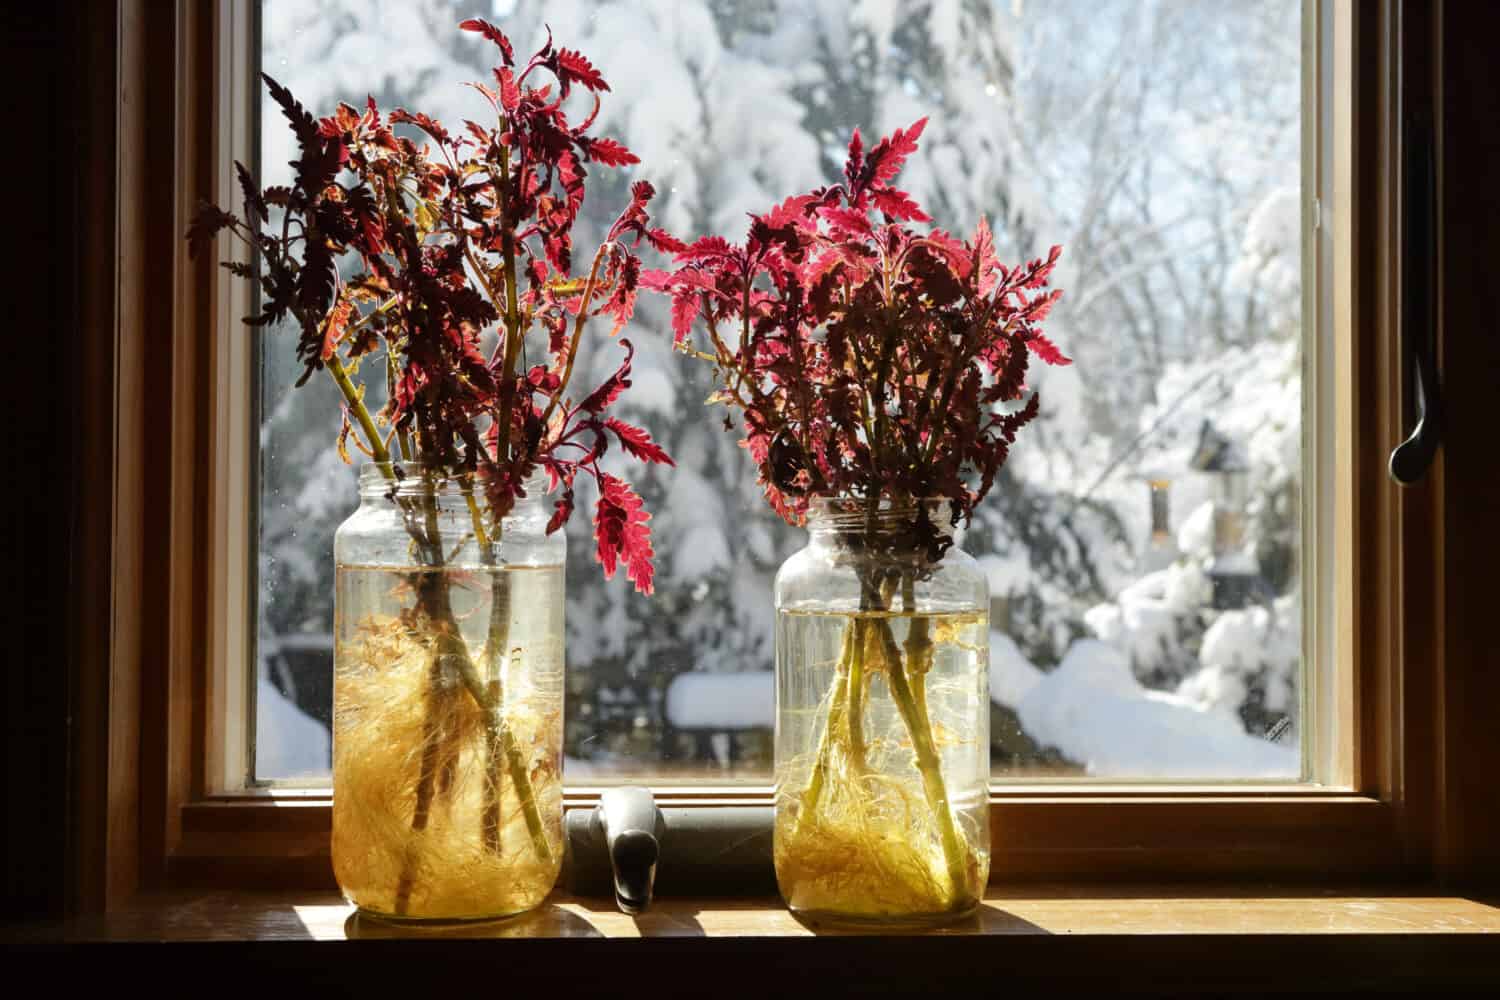 Coleus plant cuttings rooting in a jar of water on a sunny windowsill in winter with snow outside